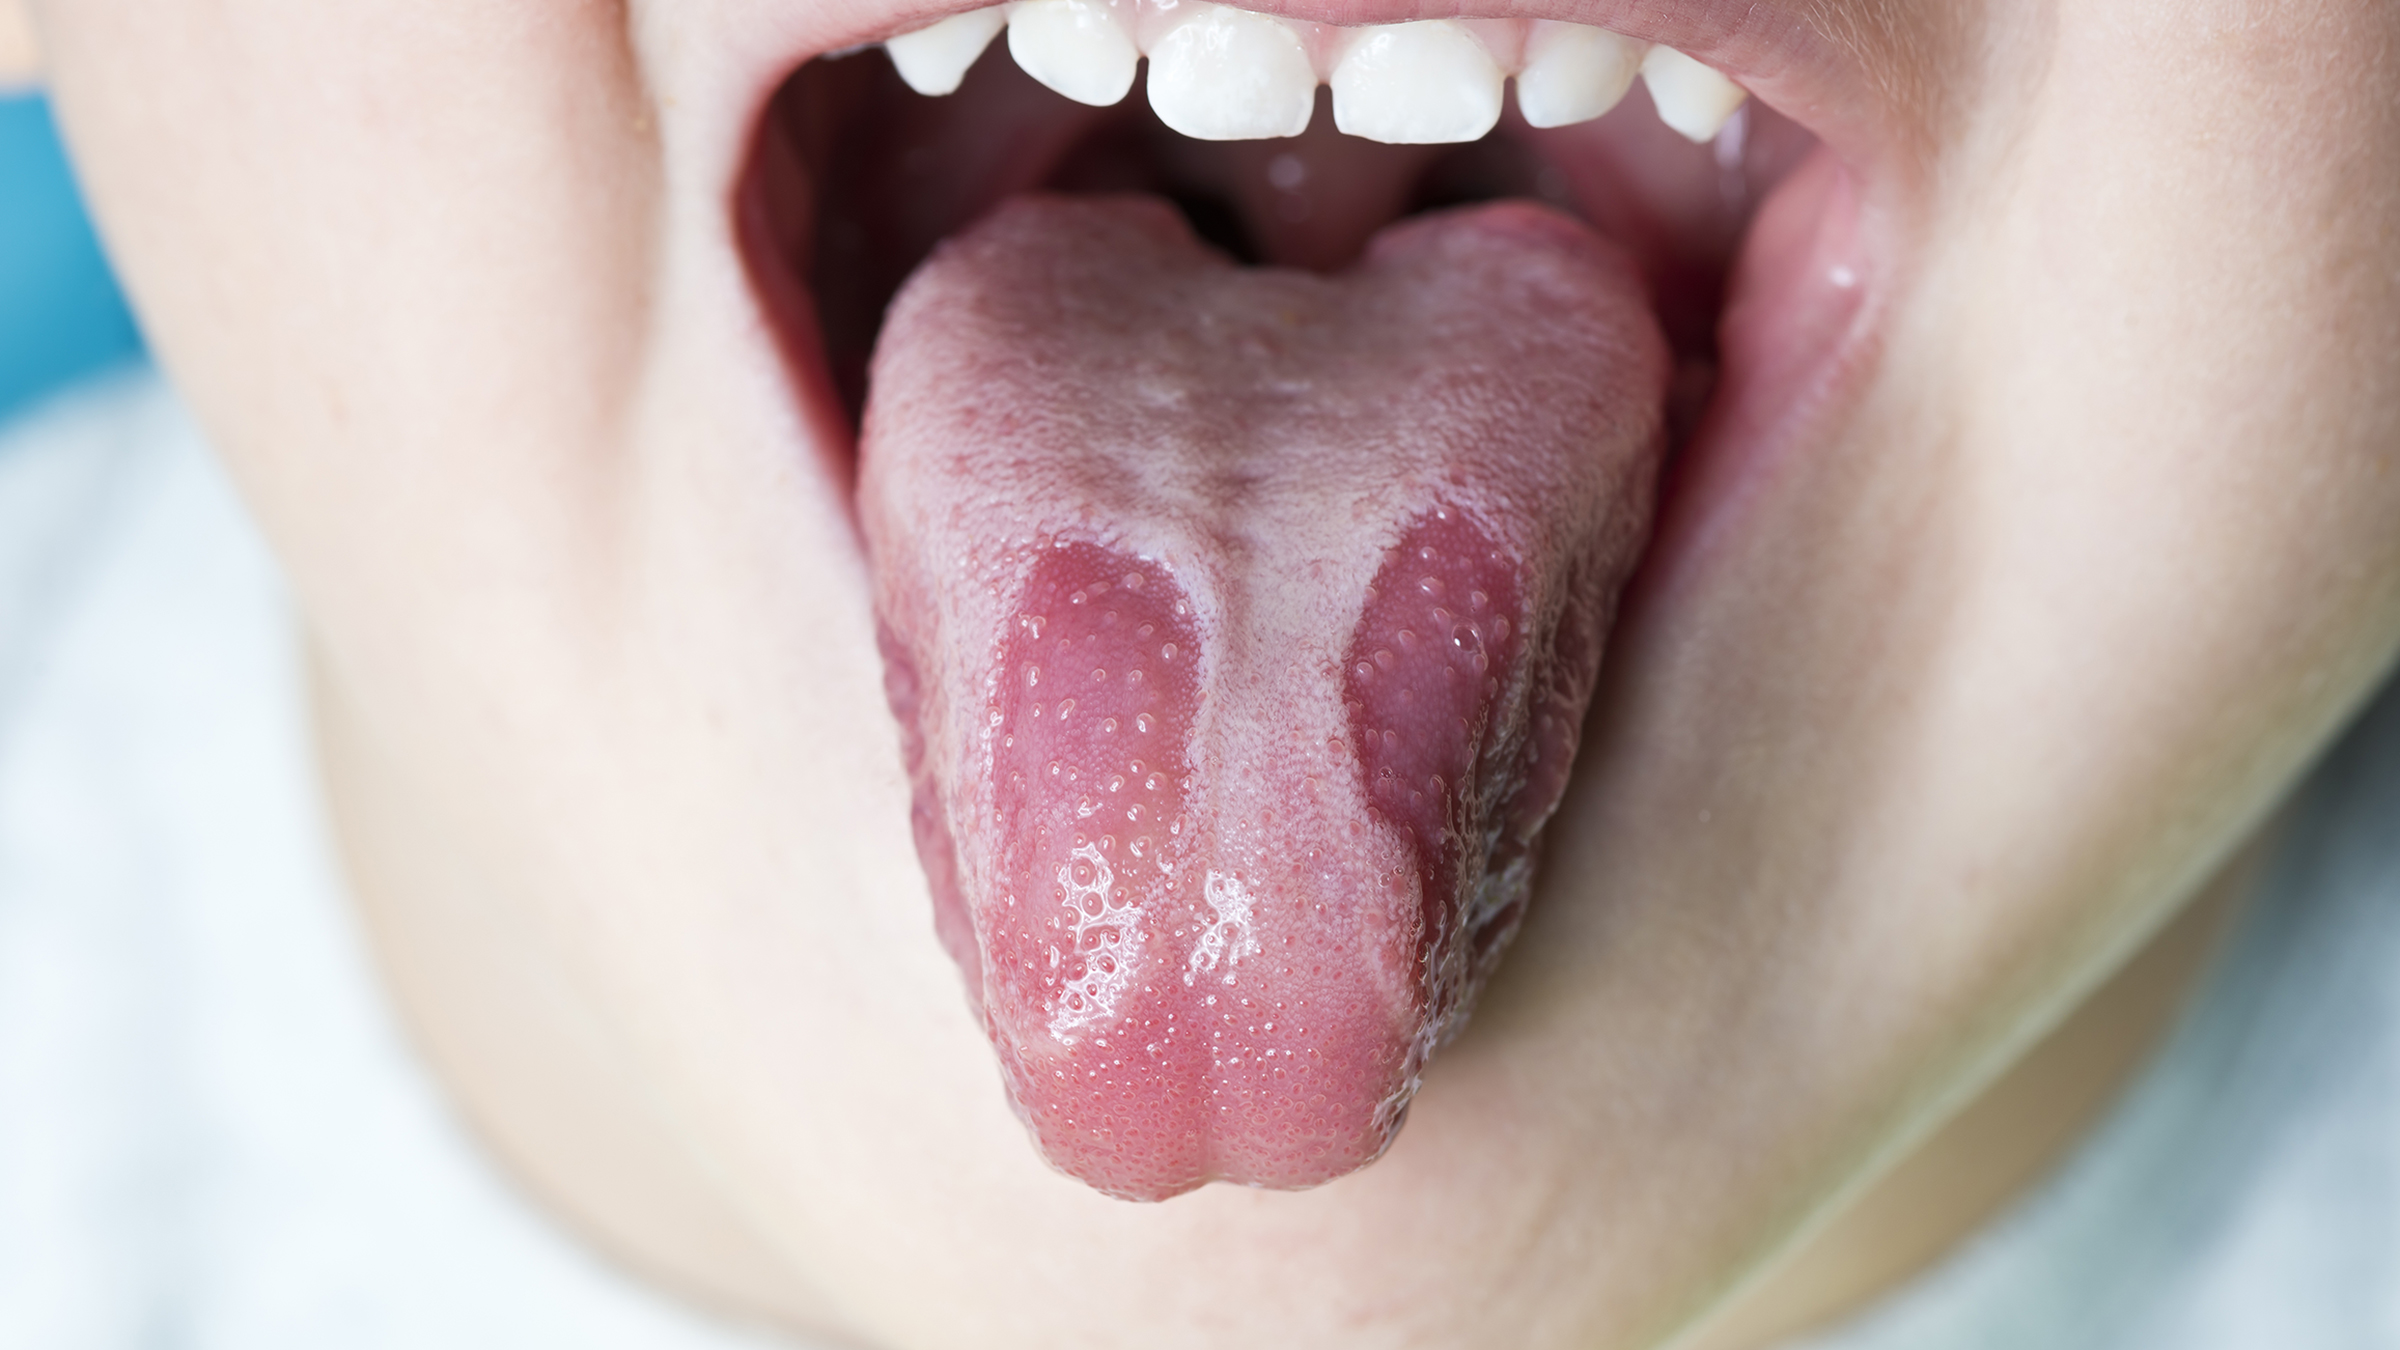 oral herpes under tongue